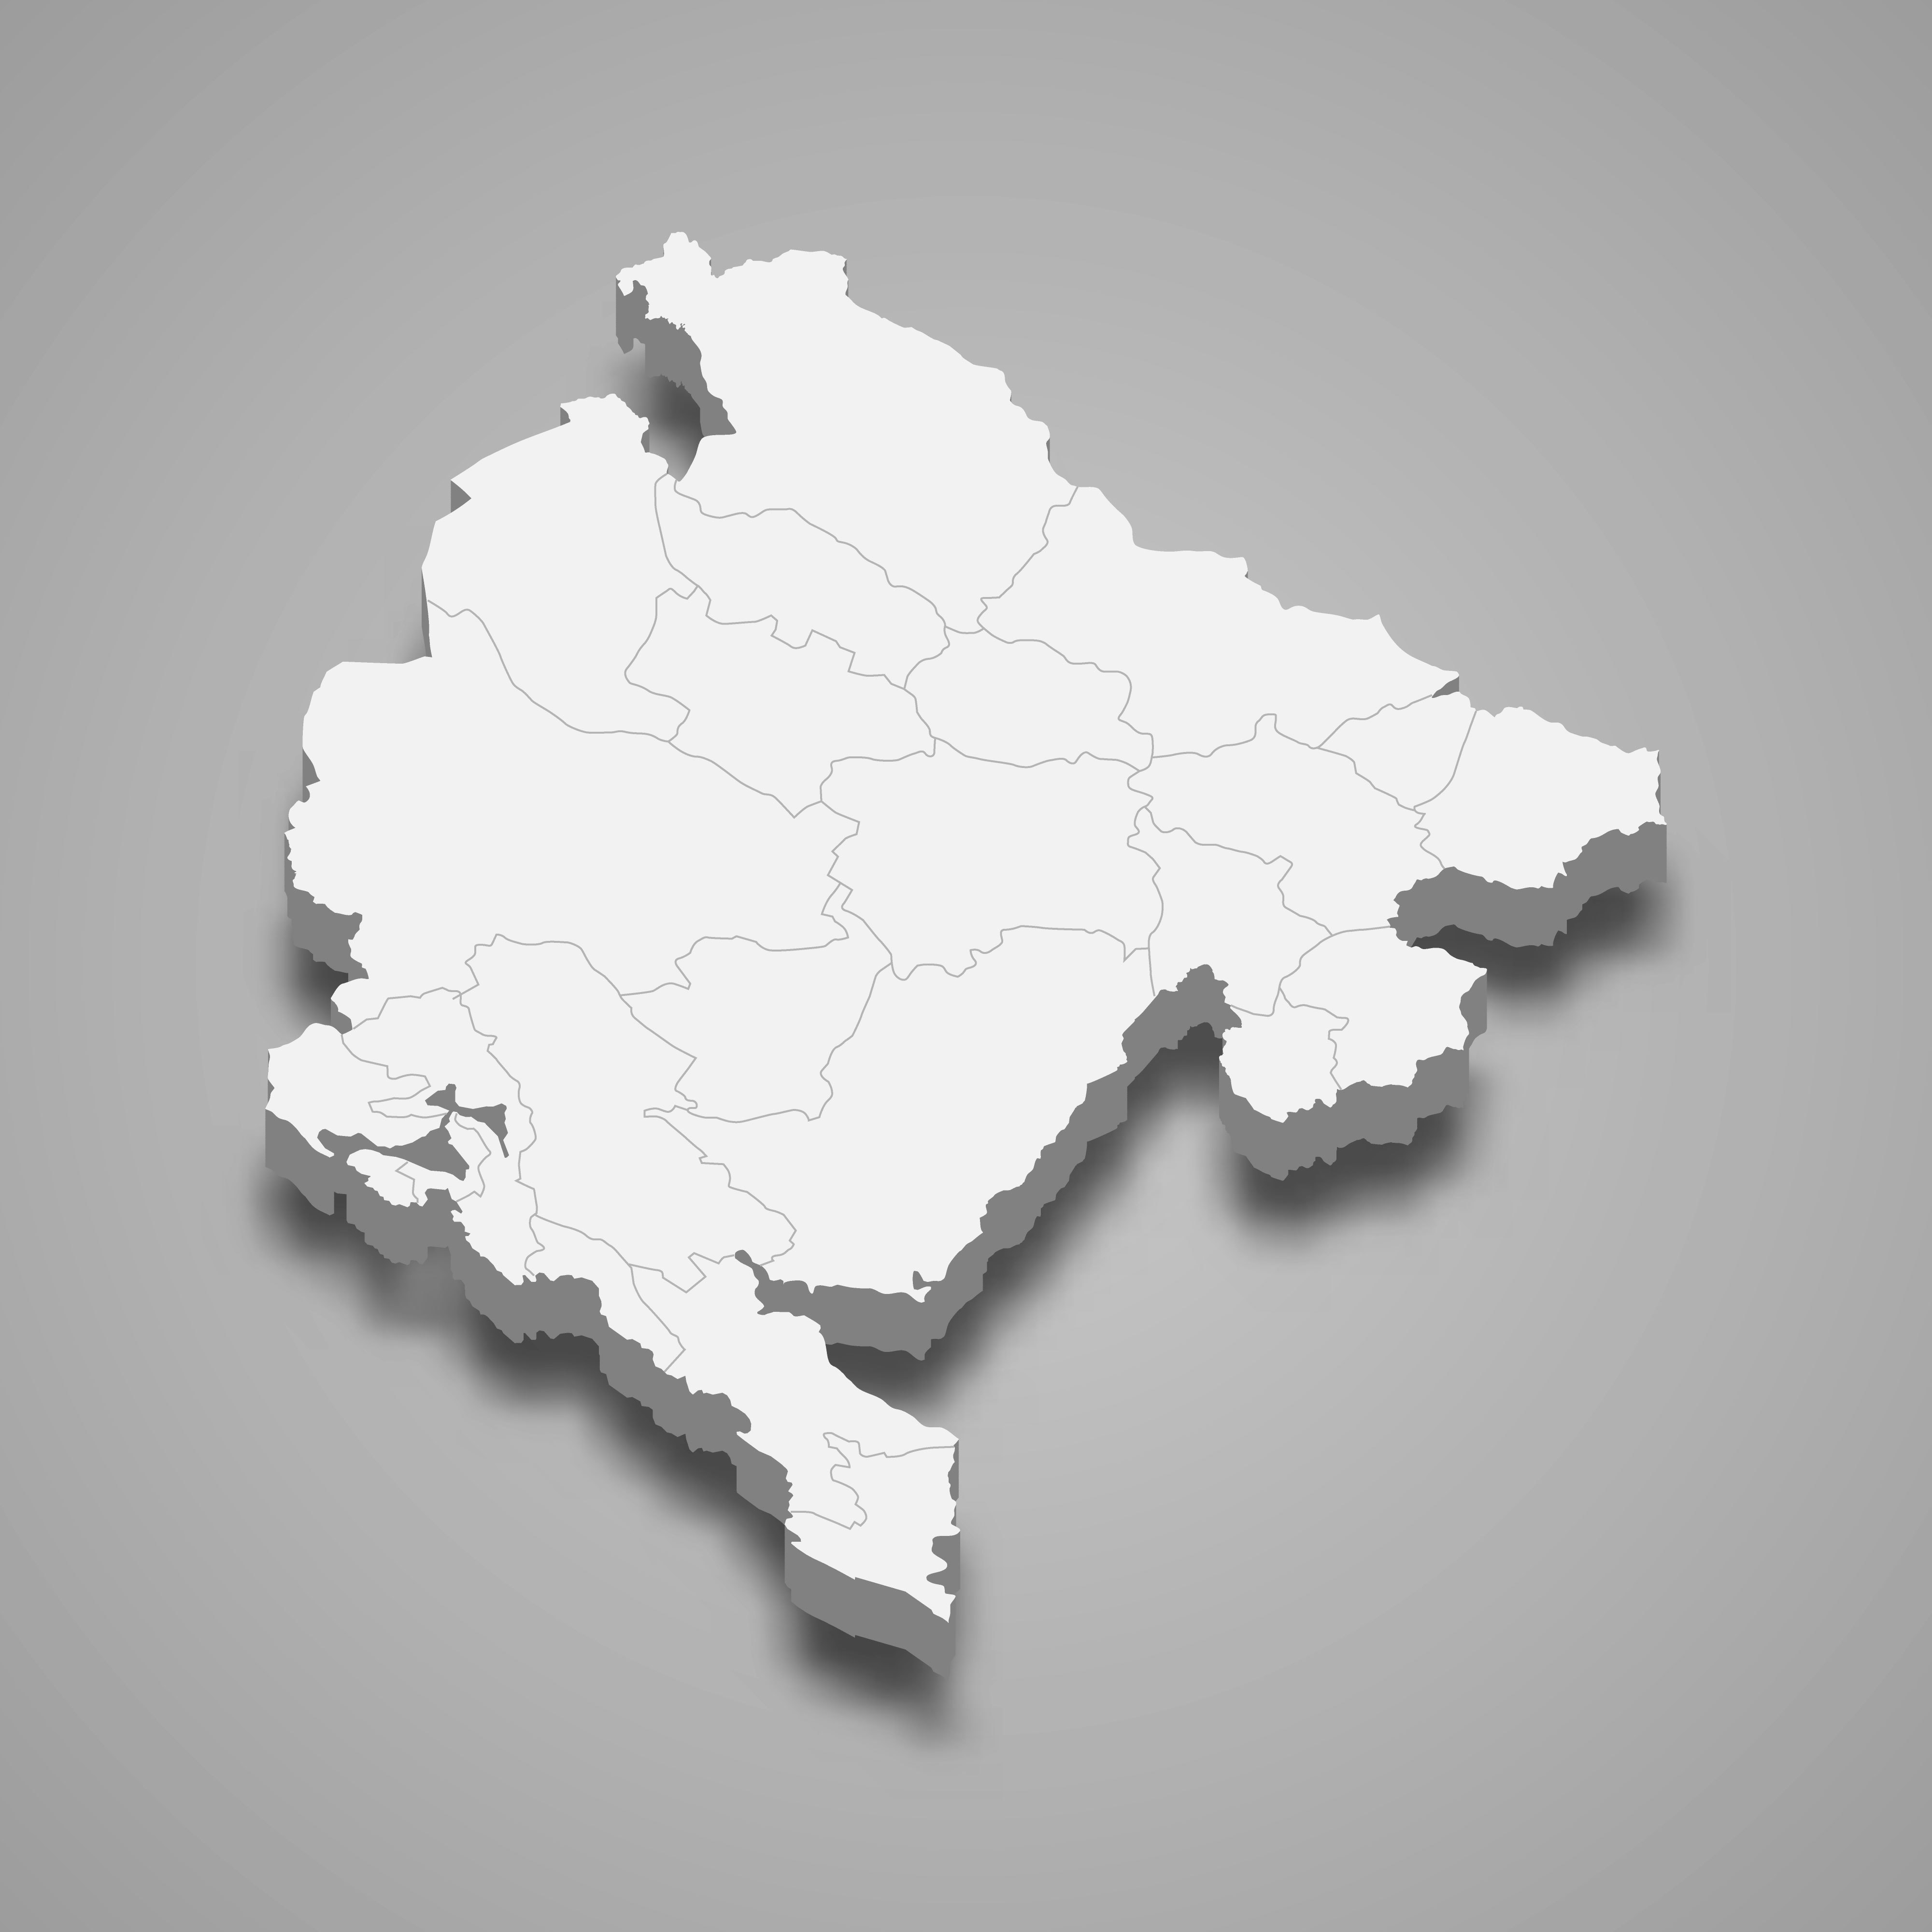 3d map of Montenegro with borders of regions. 3d map with borders Template for your design